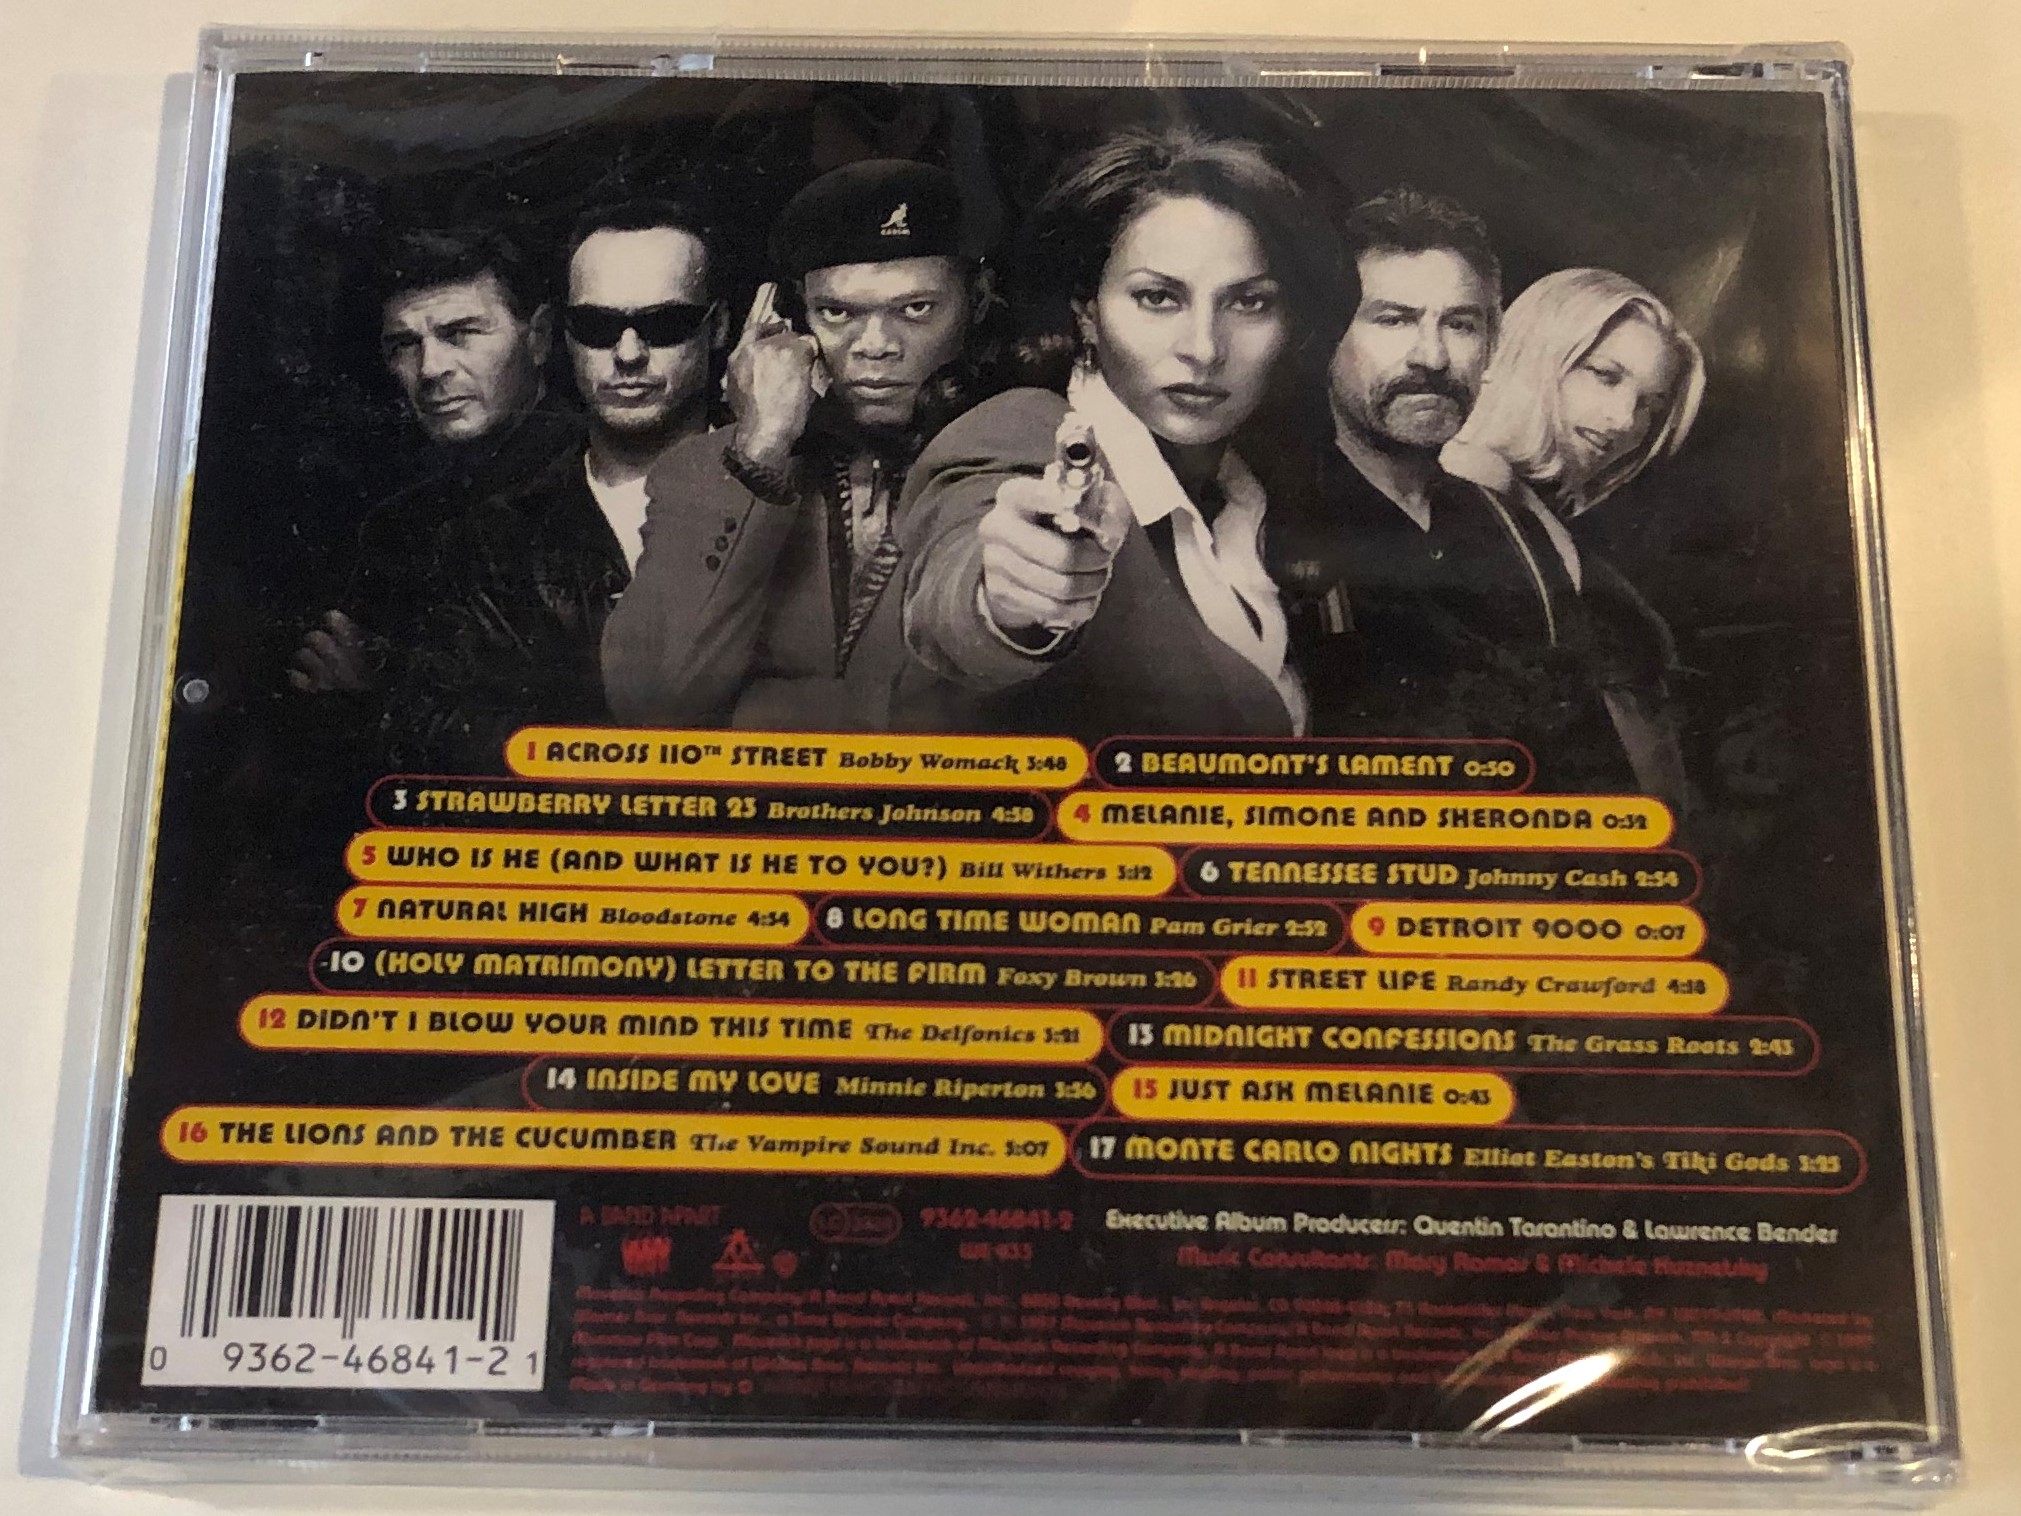 jackie-brown-a-quentin-tarantino-film-music-from-the-miramax-motion-picture-a-band-apart-audio-cd-1997-9362-46841-2-2-.jpg